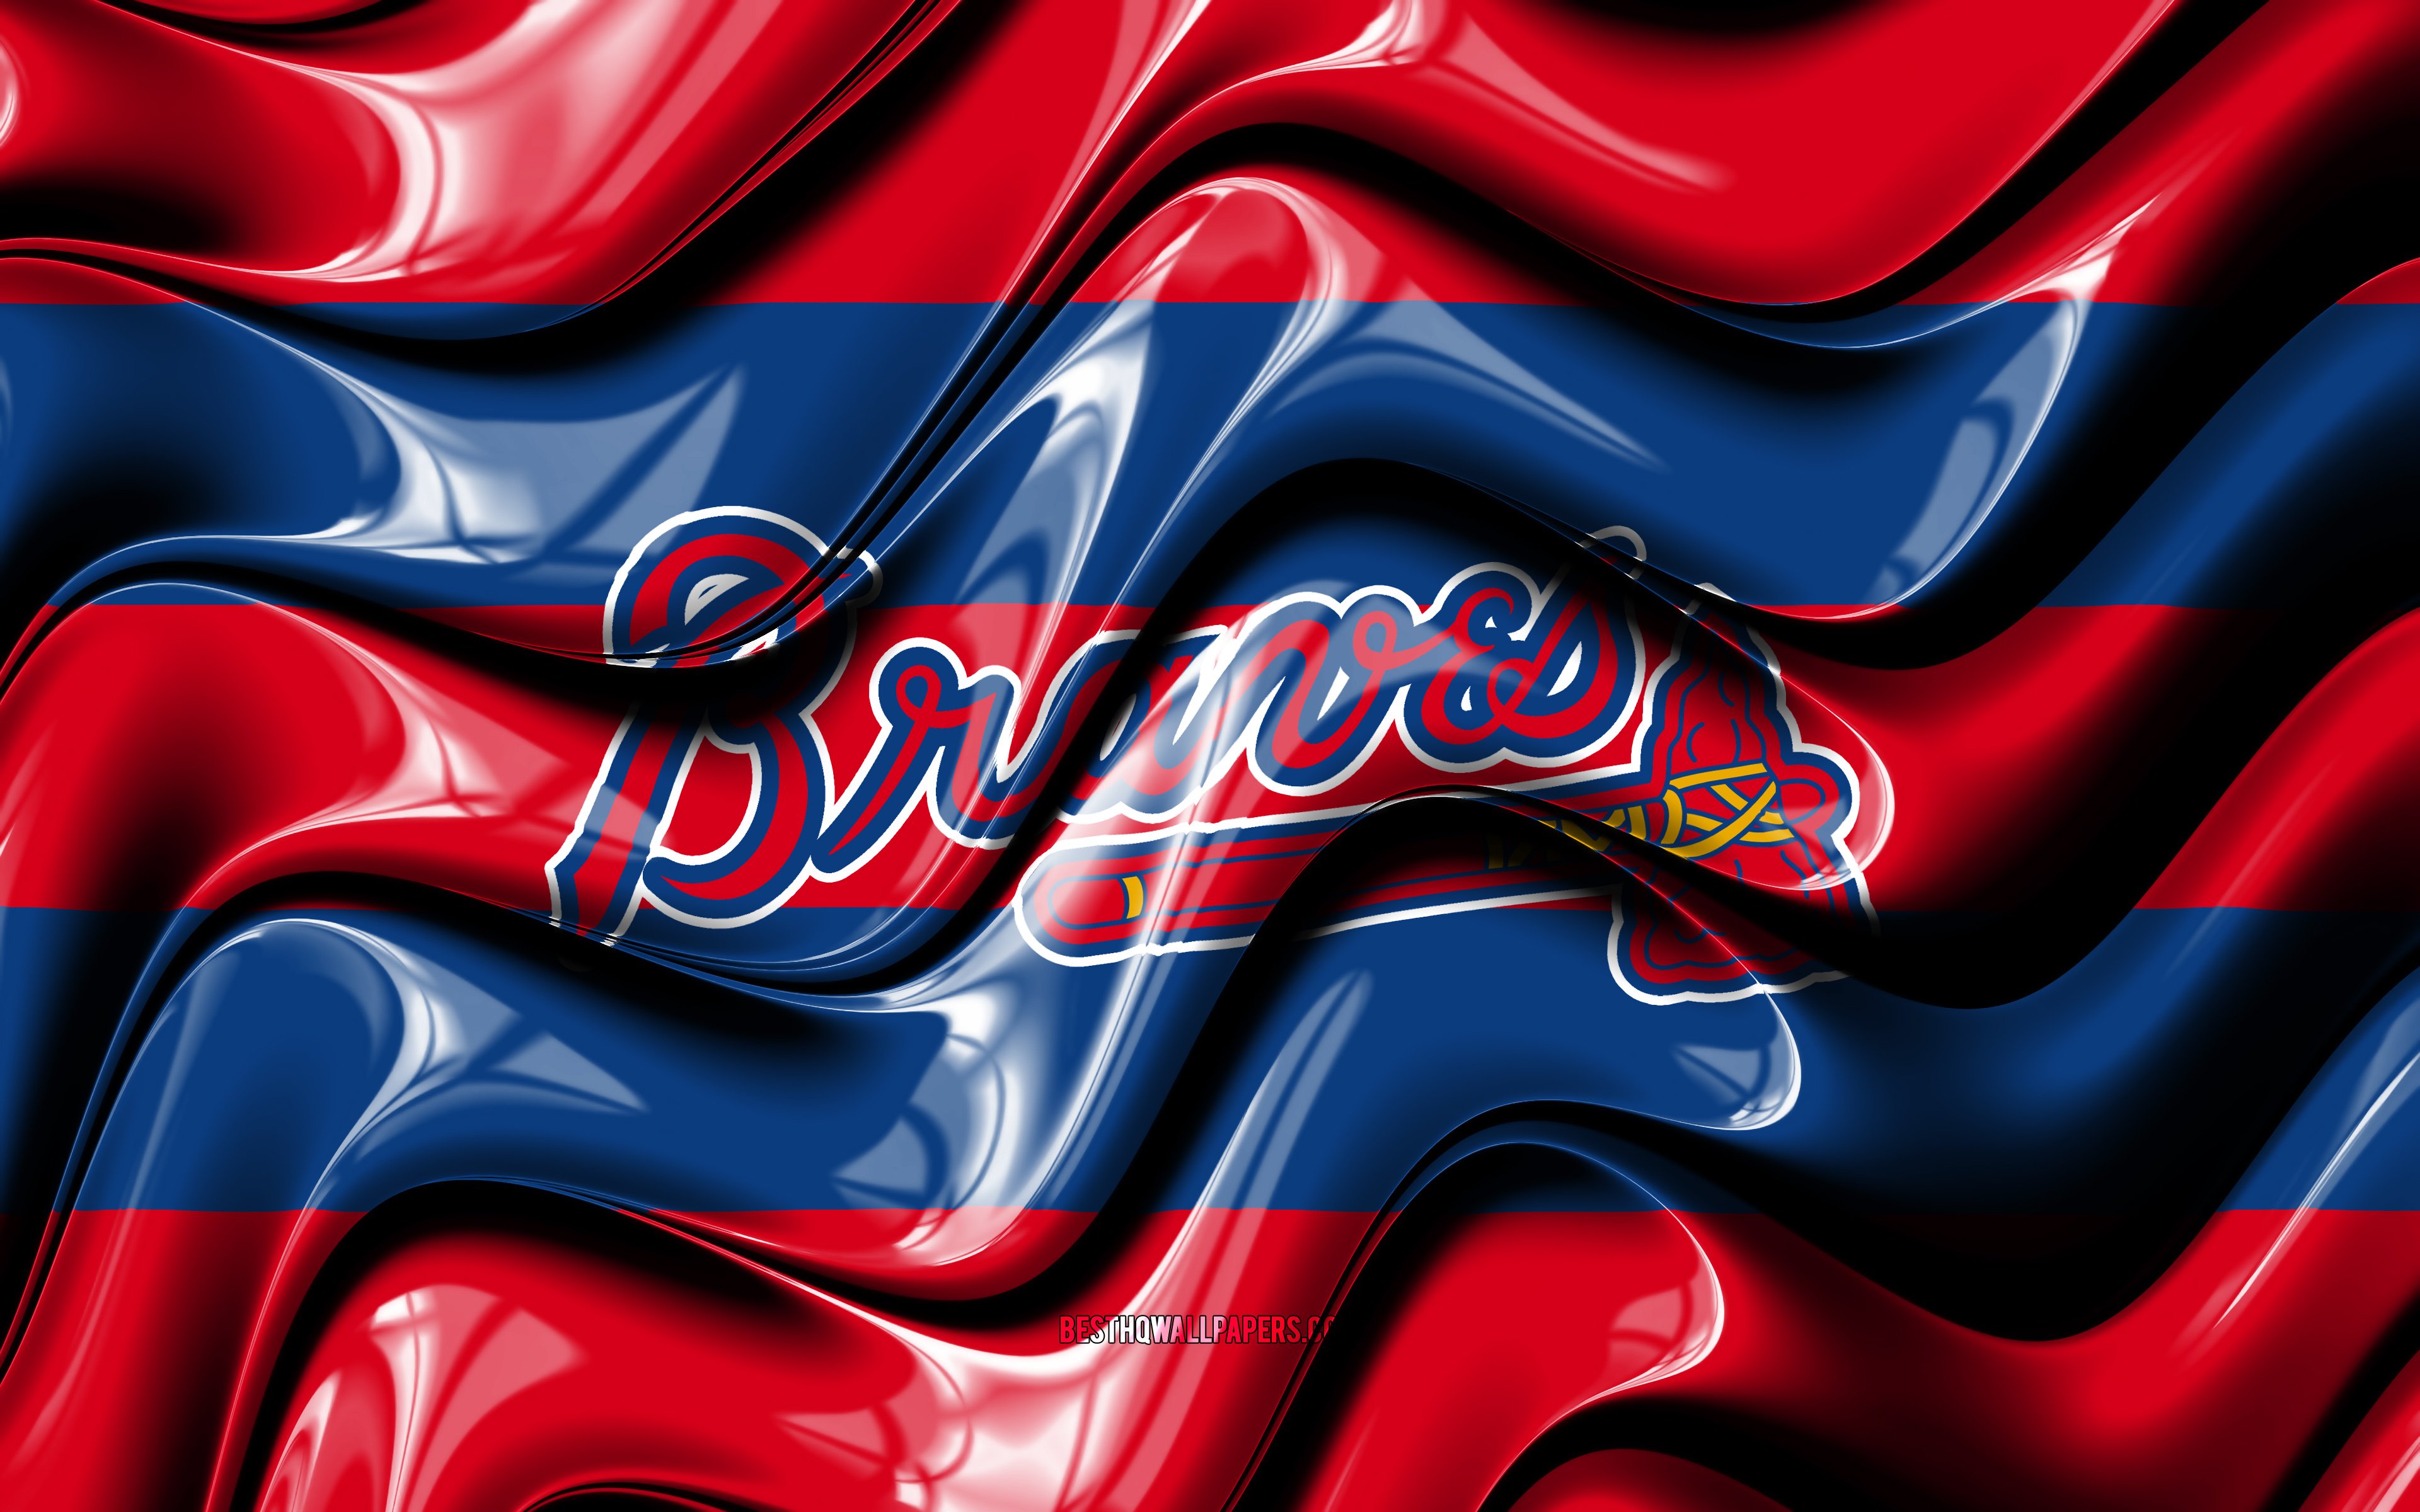 Download wallpapers Atlanta Braves flag 4k red and blue 3D waves MLB  american baseball team Atlanta Braves logo baseball Atlanta Braves for  desktop with resolution 3840x2400 High Quality HD pictures wallpapers